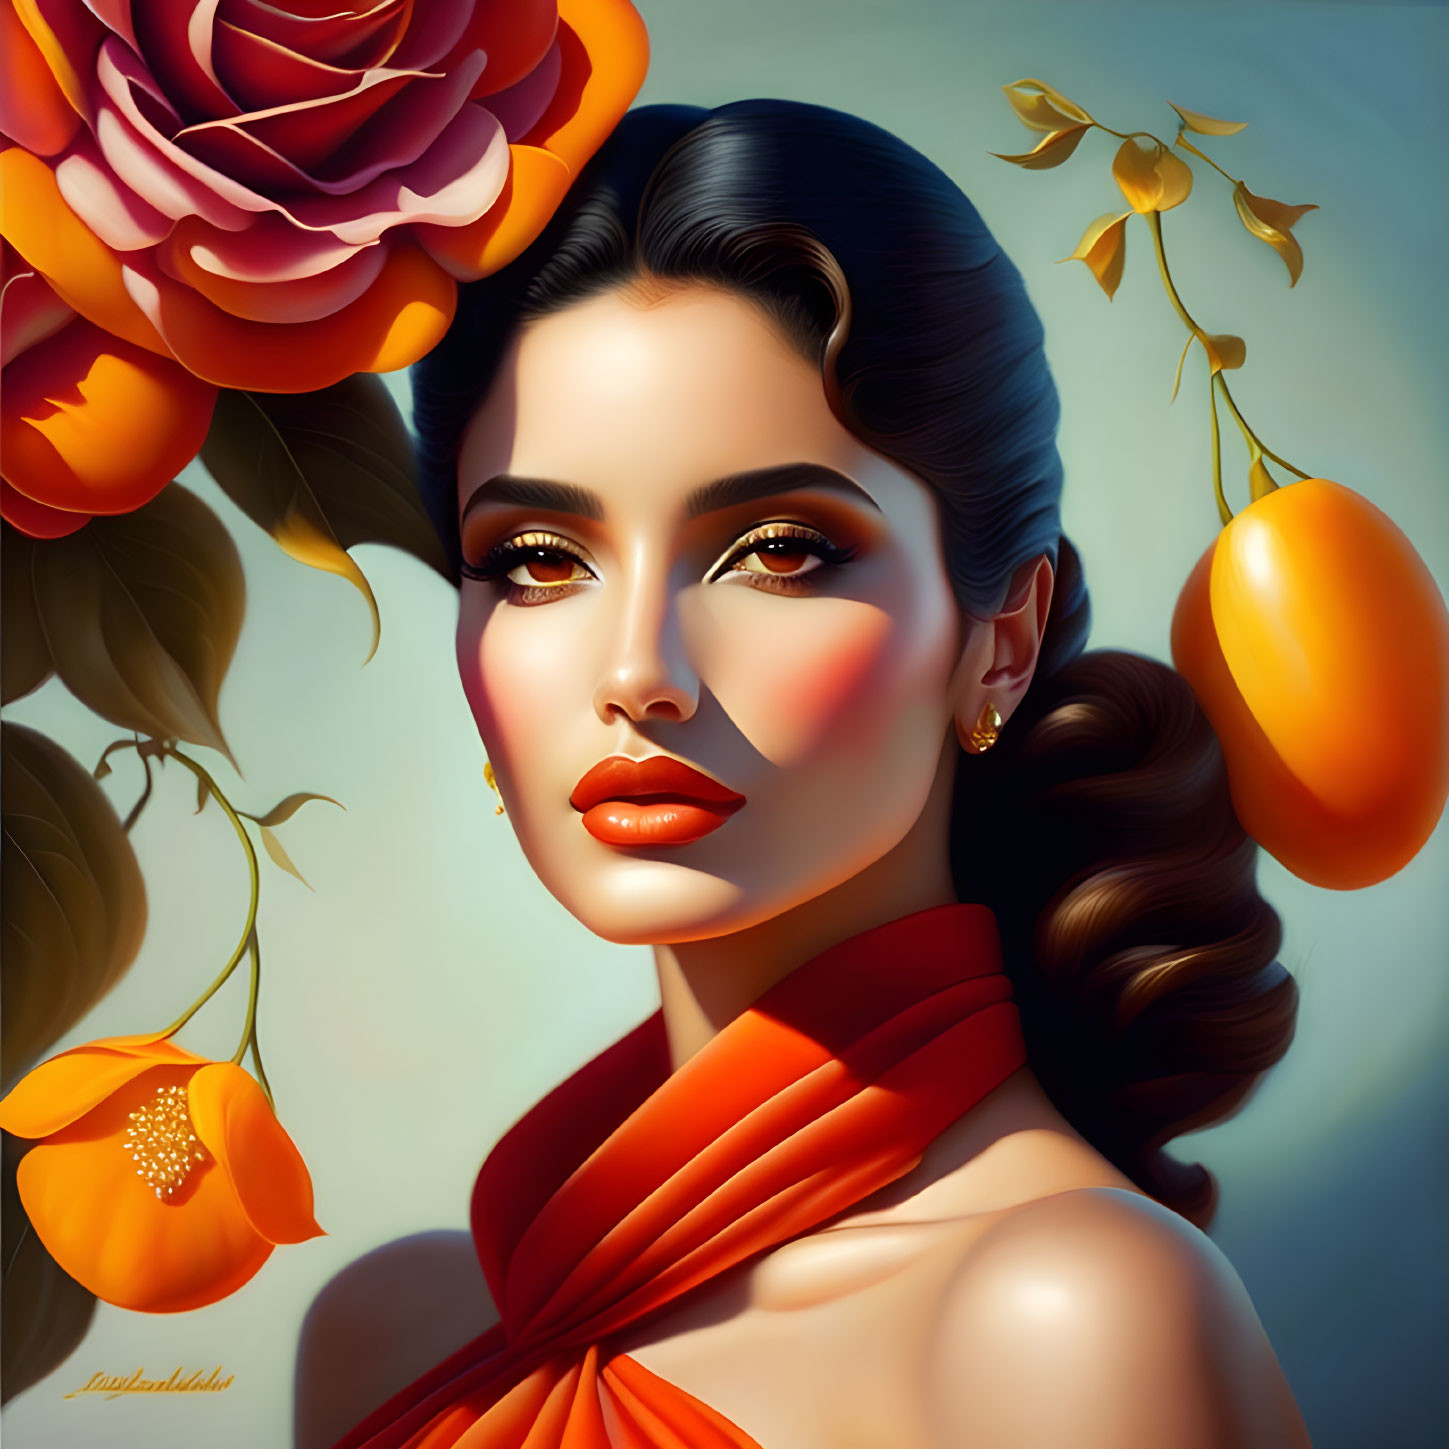 Illustrated portrait of a woman in red-orange attire with sleek hair, radiant makeup, surrounded by flowers